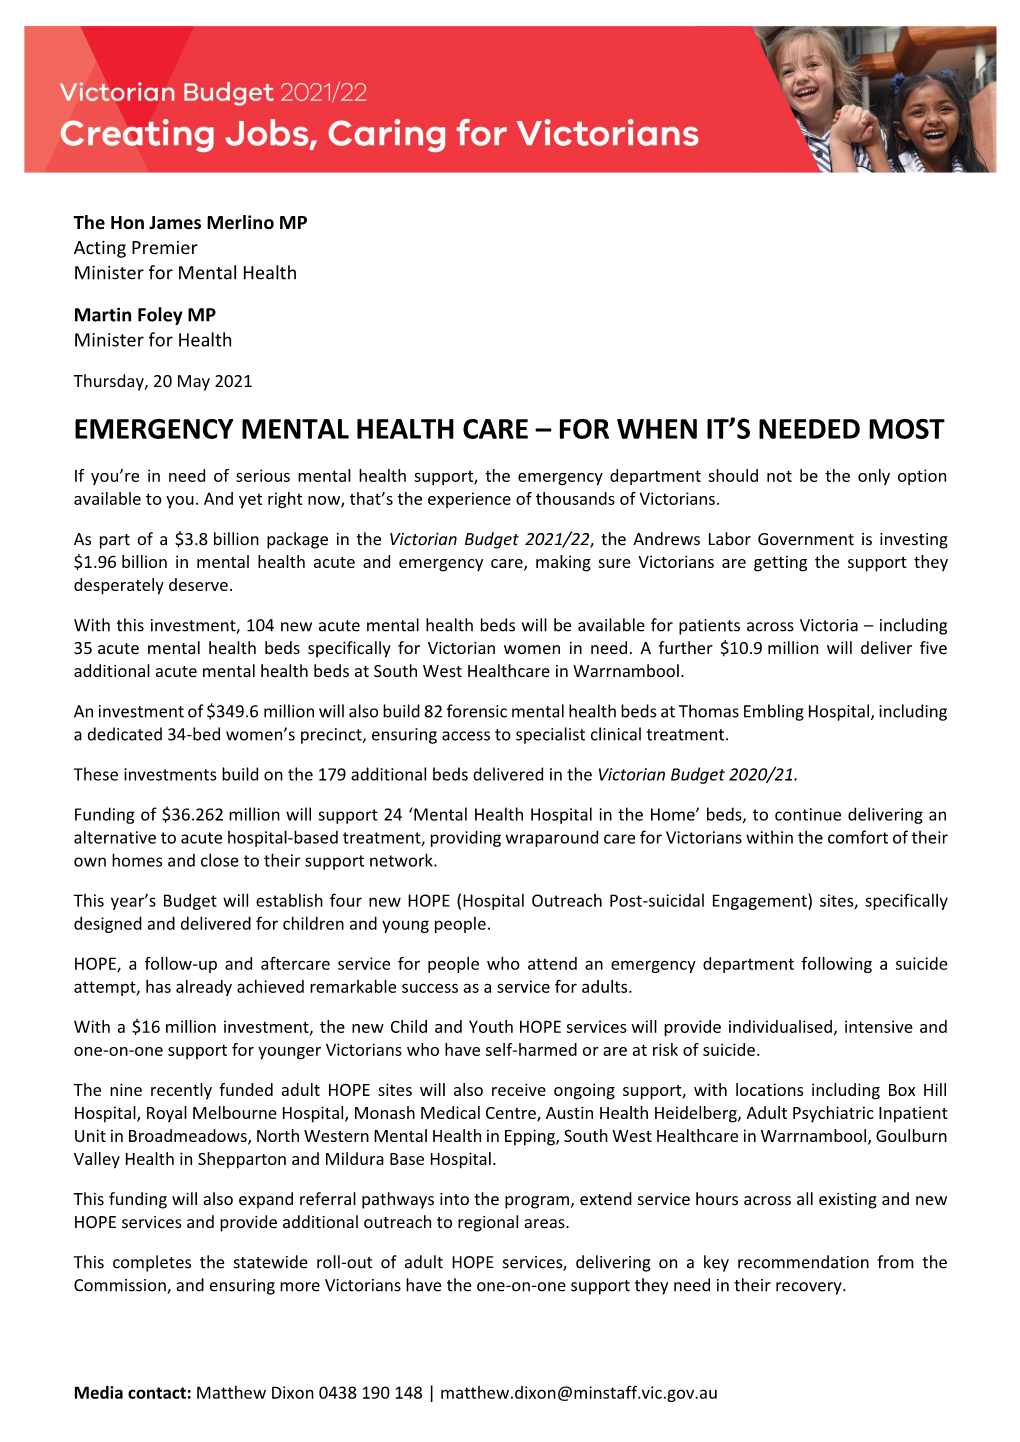 Emergency Mental Health Care – for When It's Needed Most